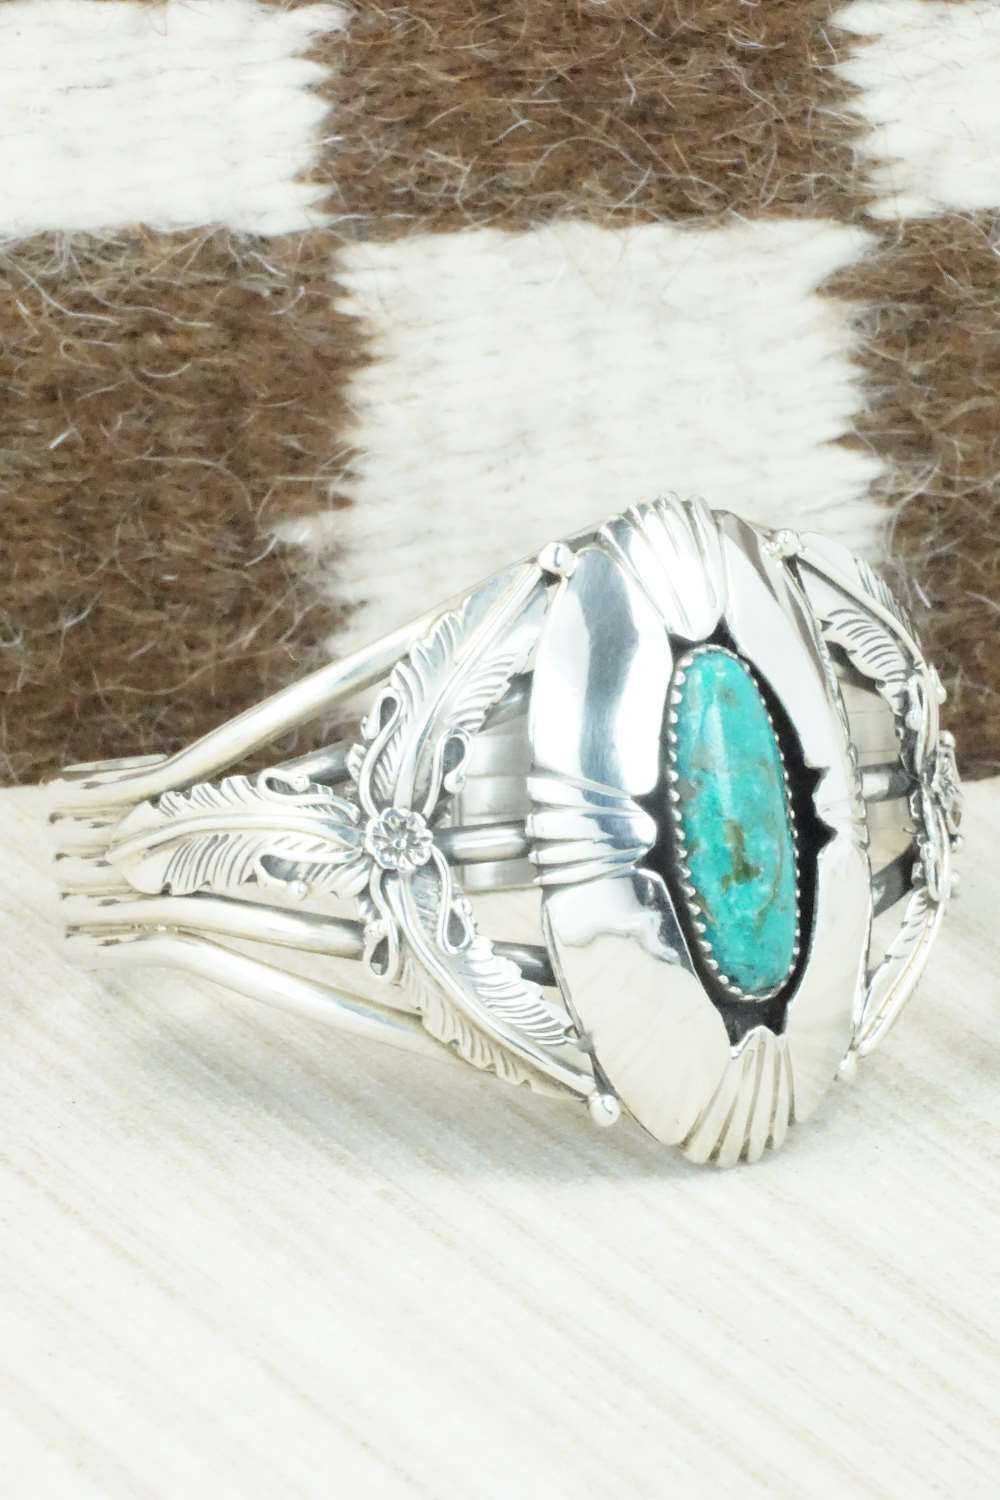 Turquoise & Sterling Silver Bracelet - Cecil Saunders